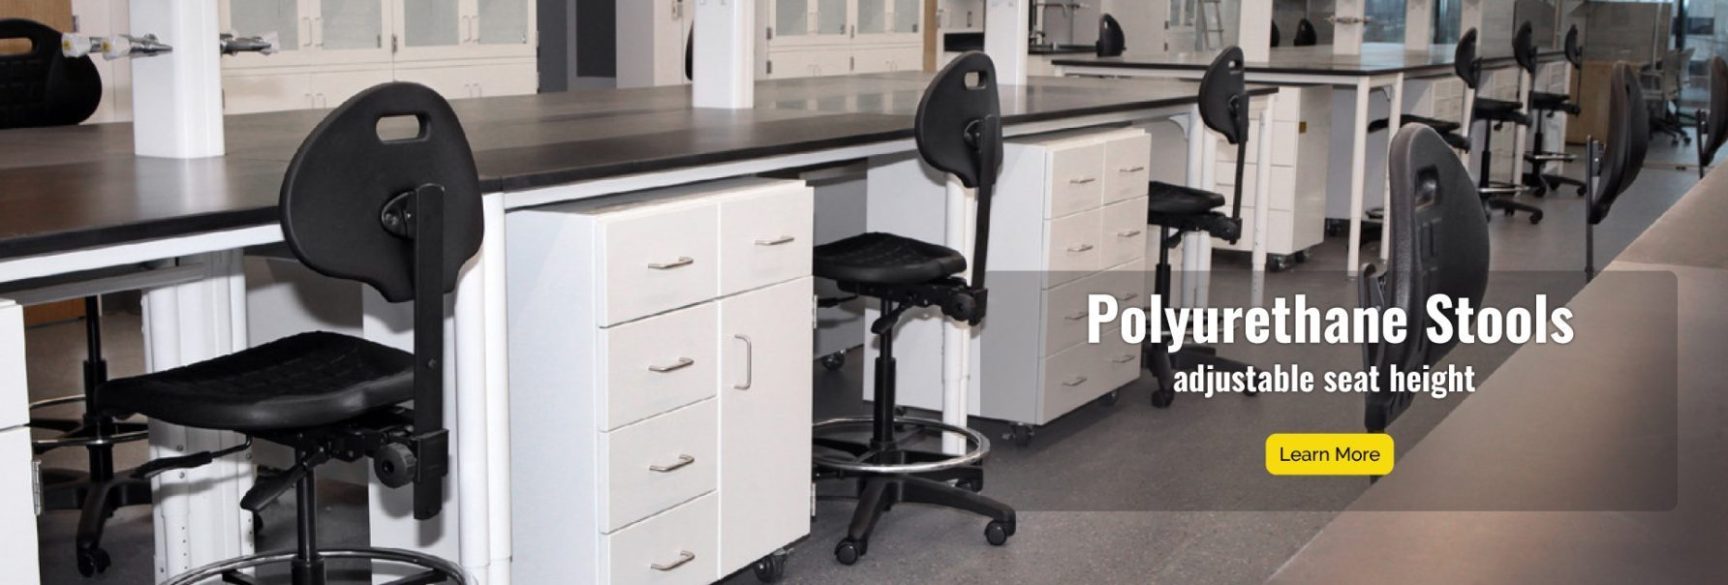 Polyrurethane Stools have adjustable seat height and depth